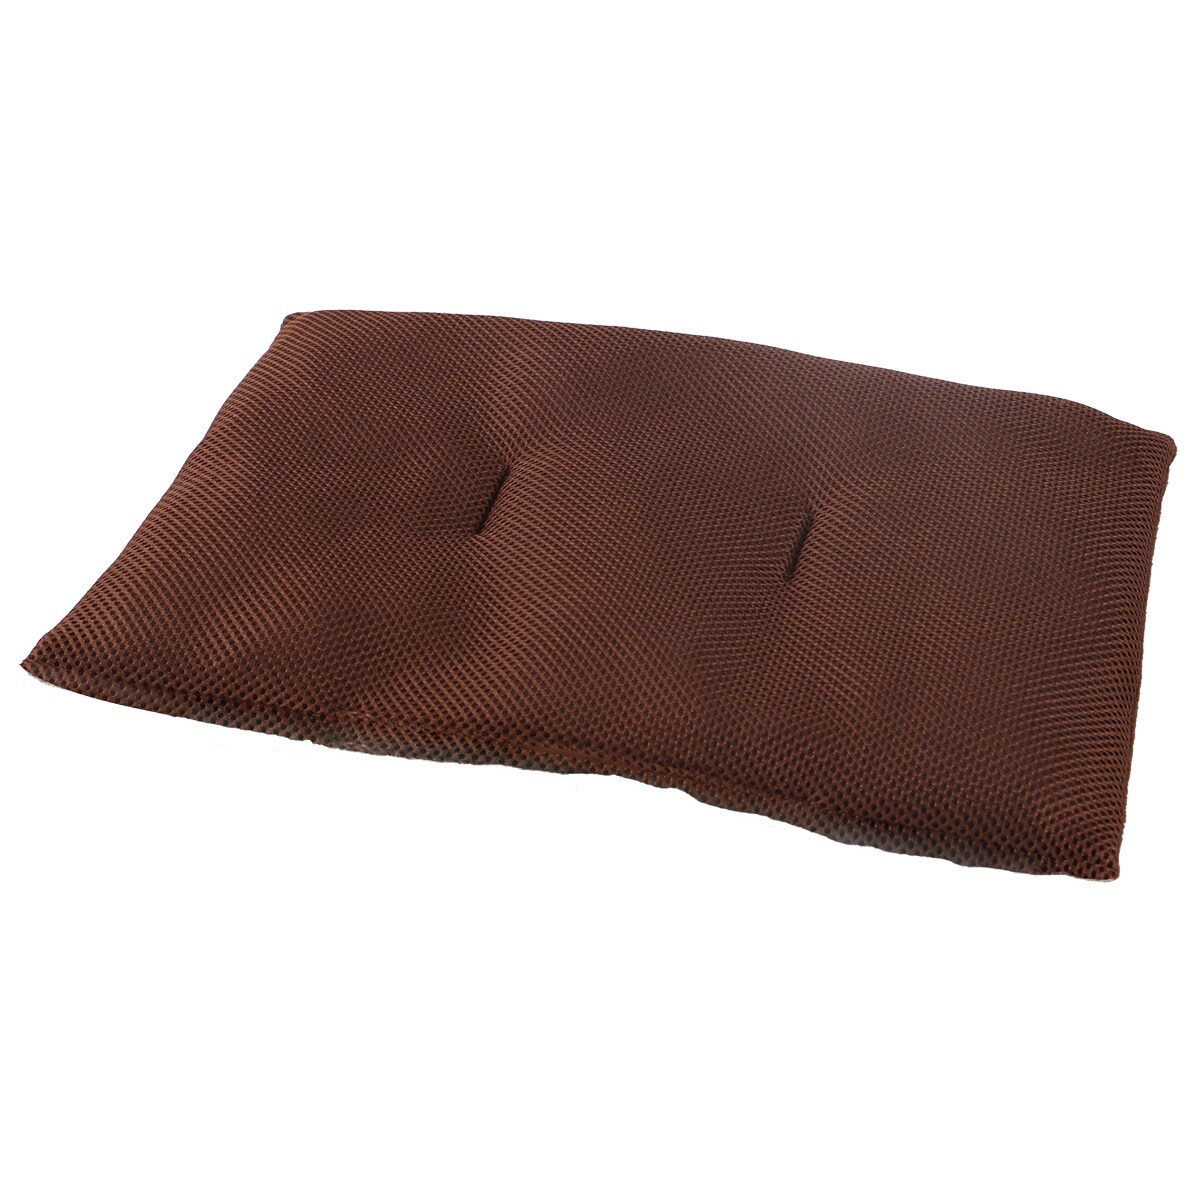 kalabo. go in . cushion attaching pet house ( Brown )nitoli